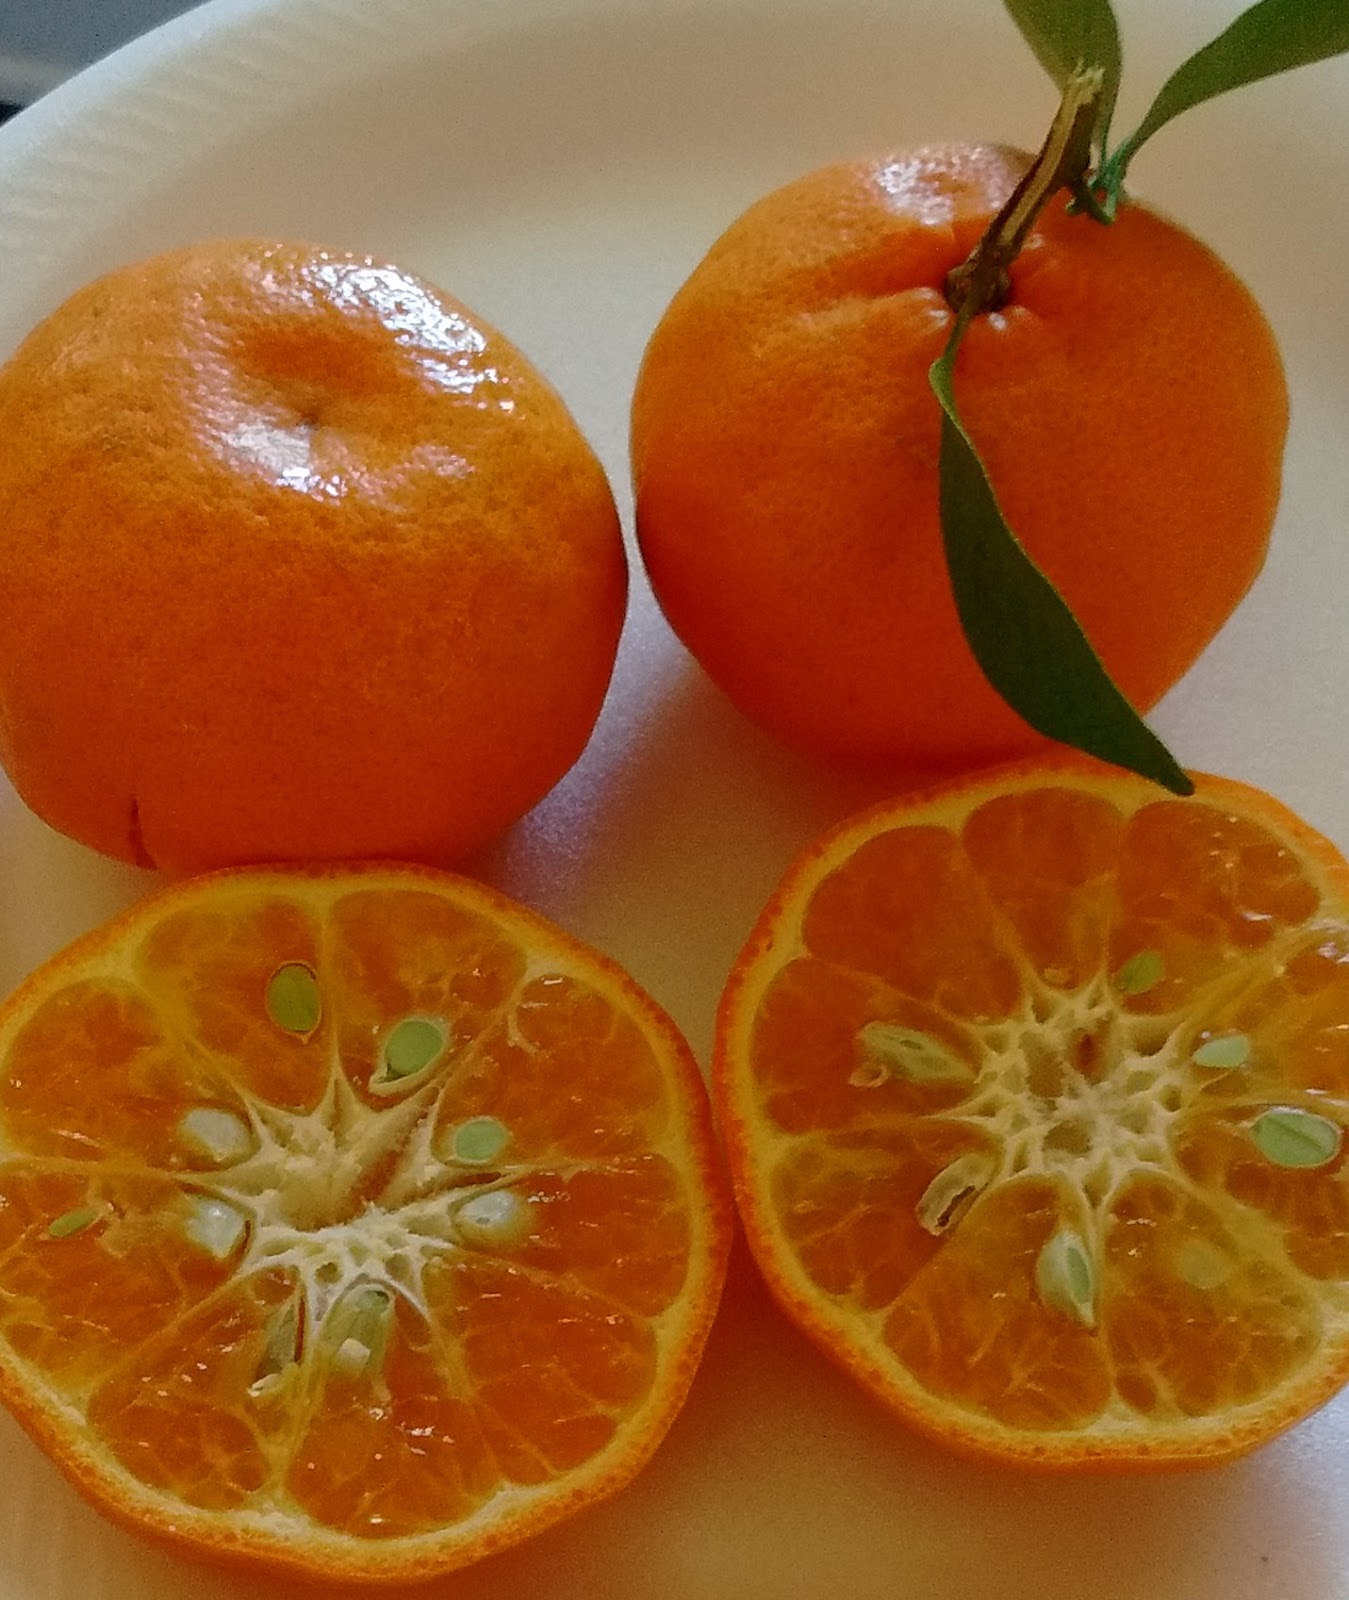 4 Facts About the Honey Mandarin – Fresh from the Sunbelt